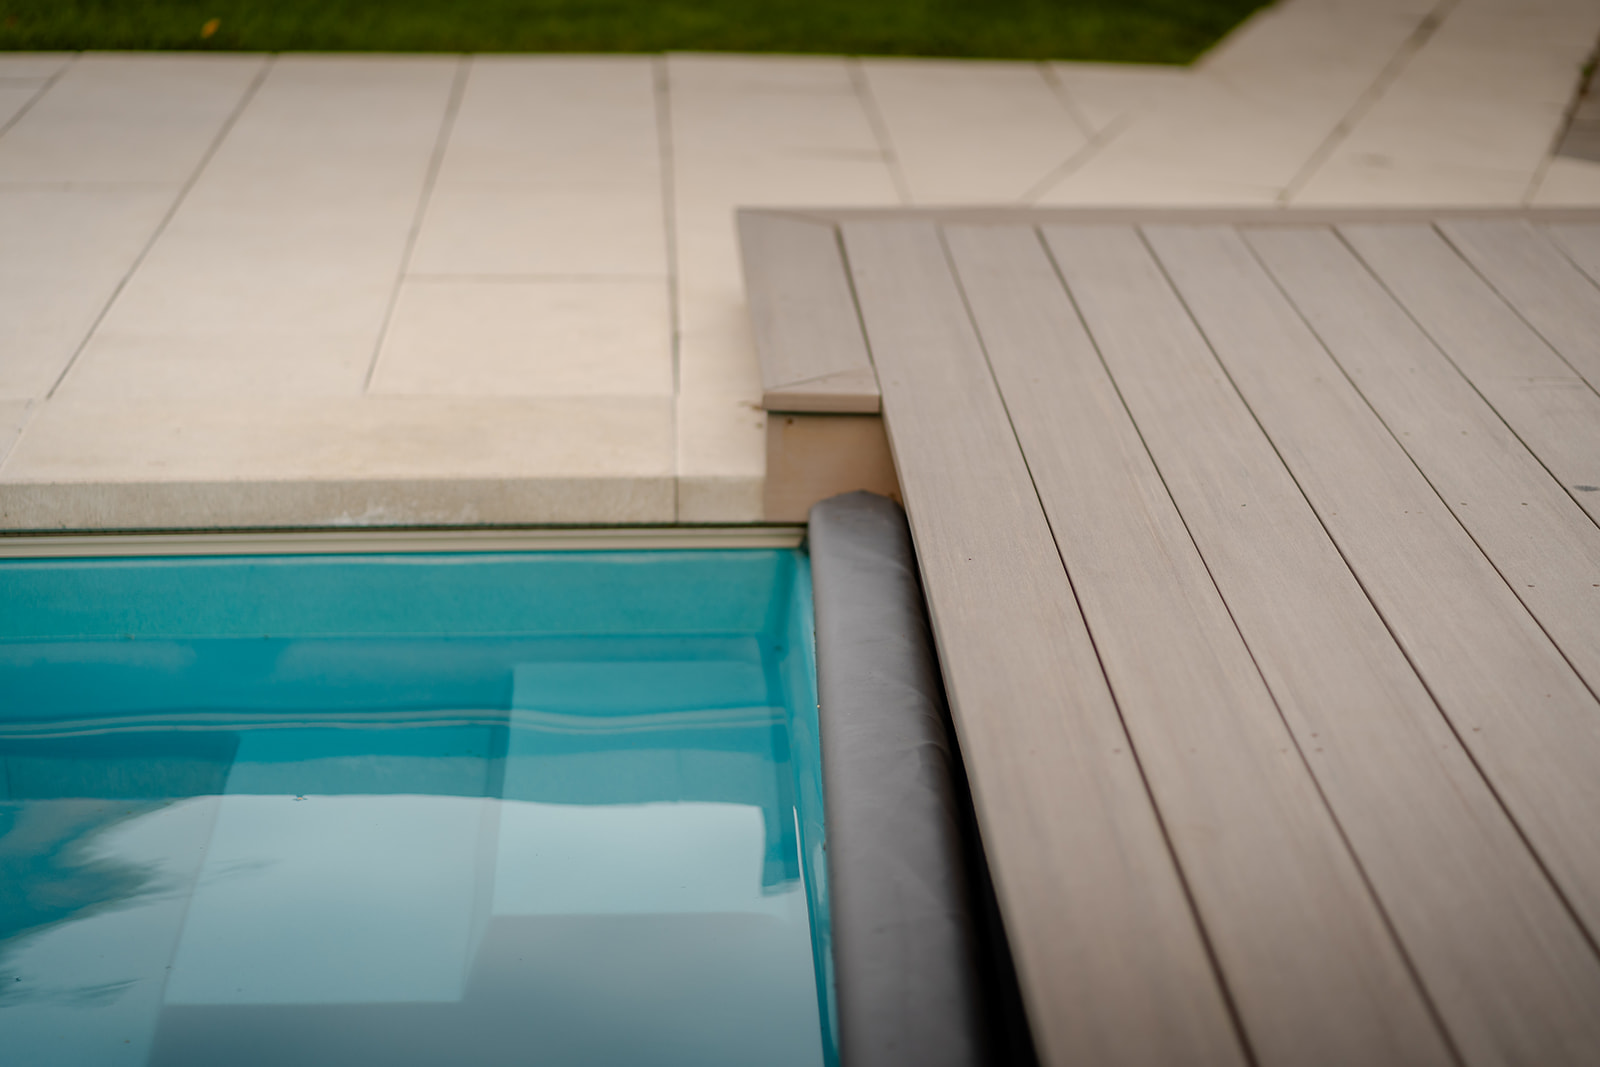 The edge of the raised deck connected to the inground pool.